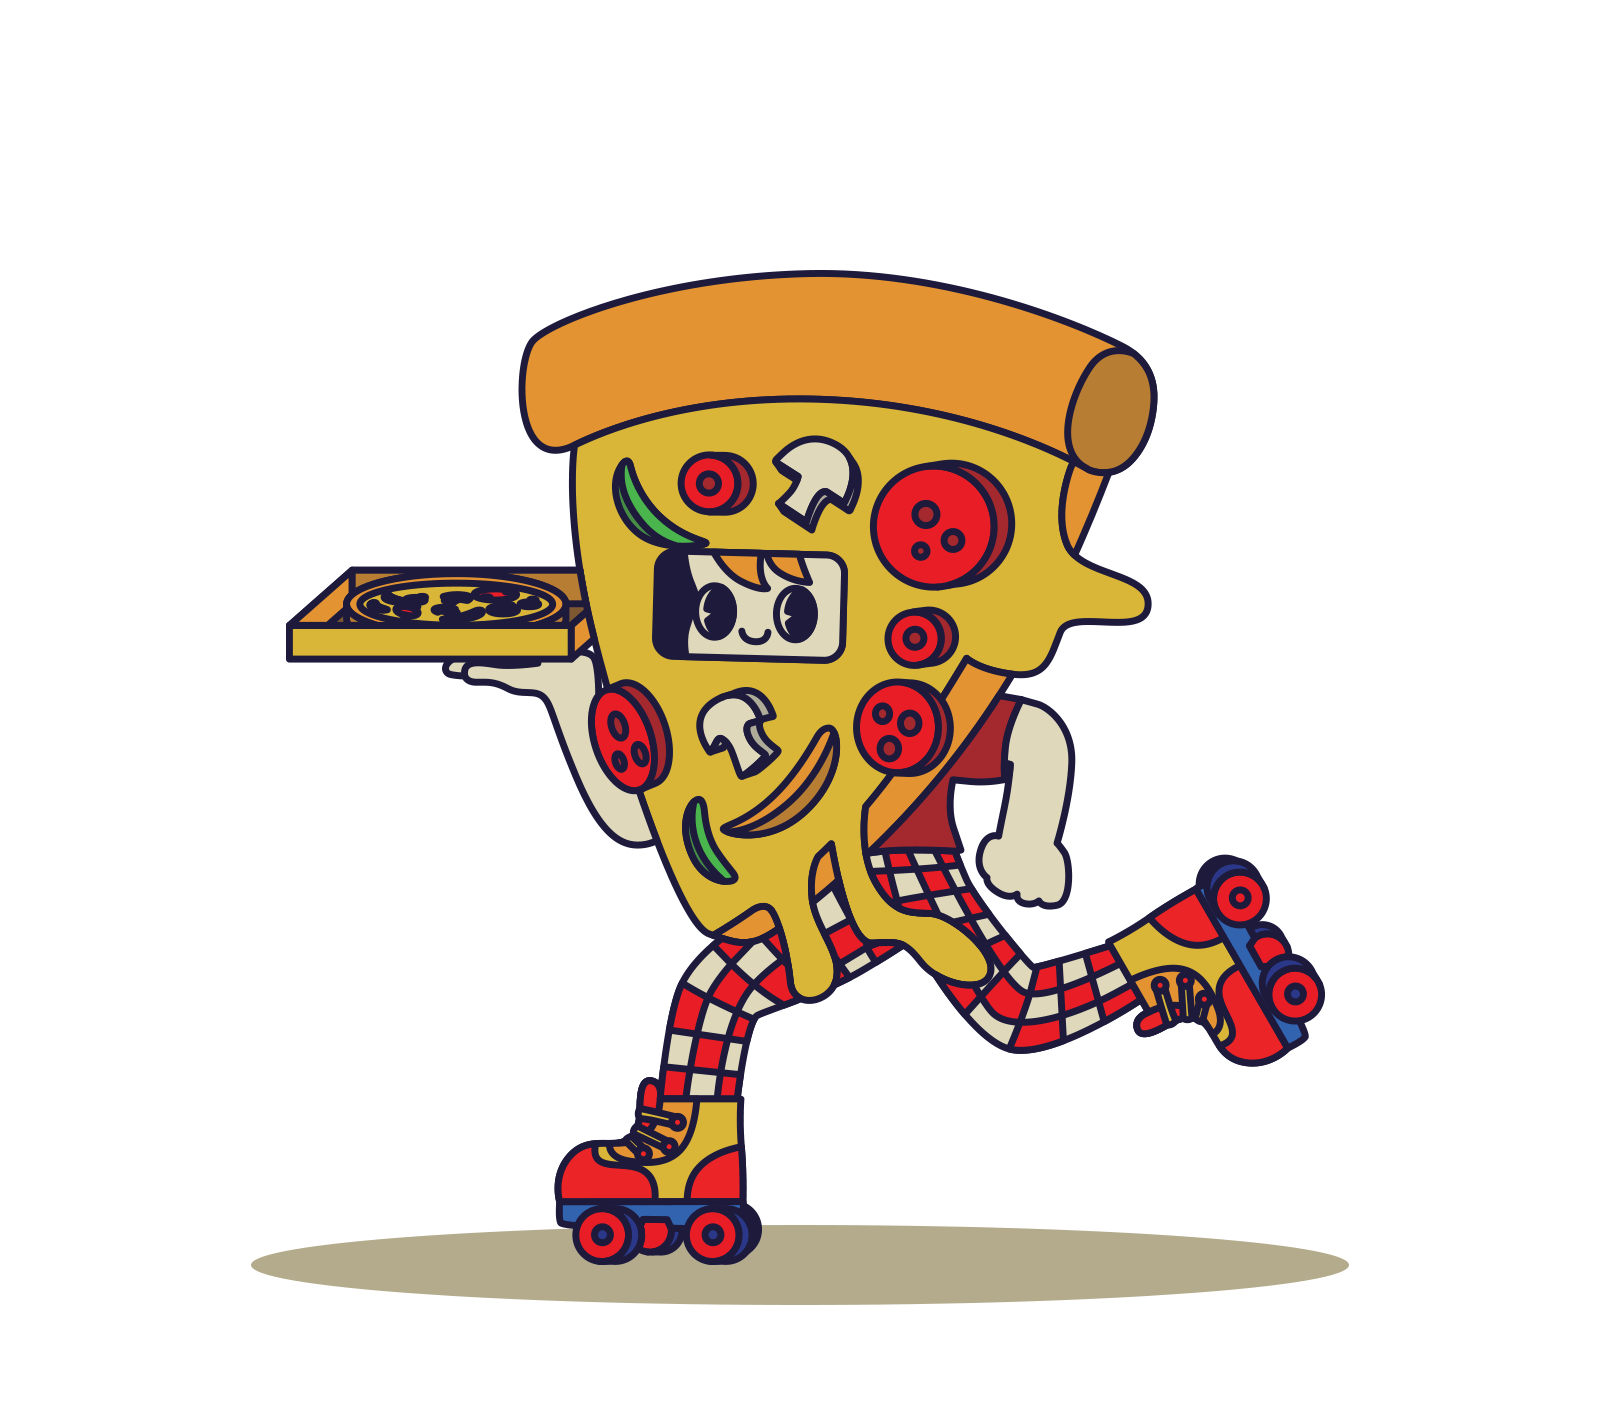 Pizzaria Supreme character in pizza costume jumping in roller skates